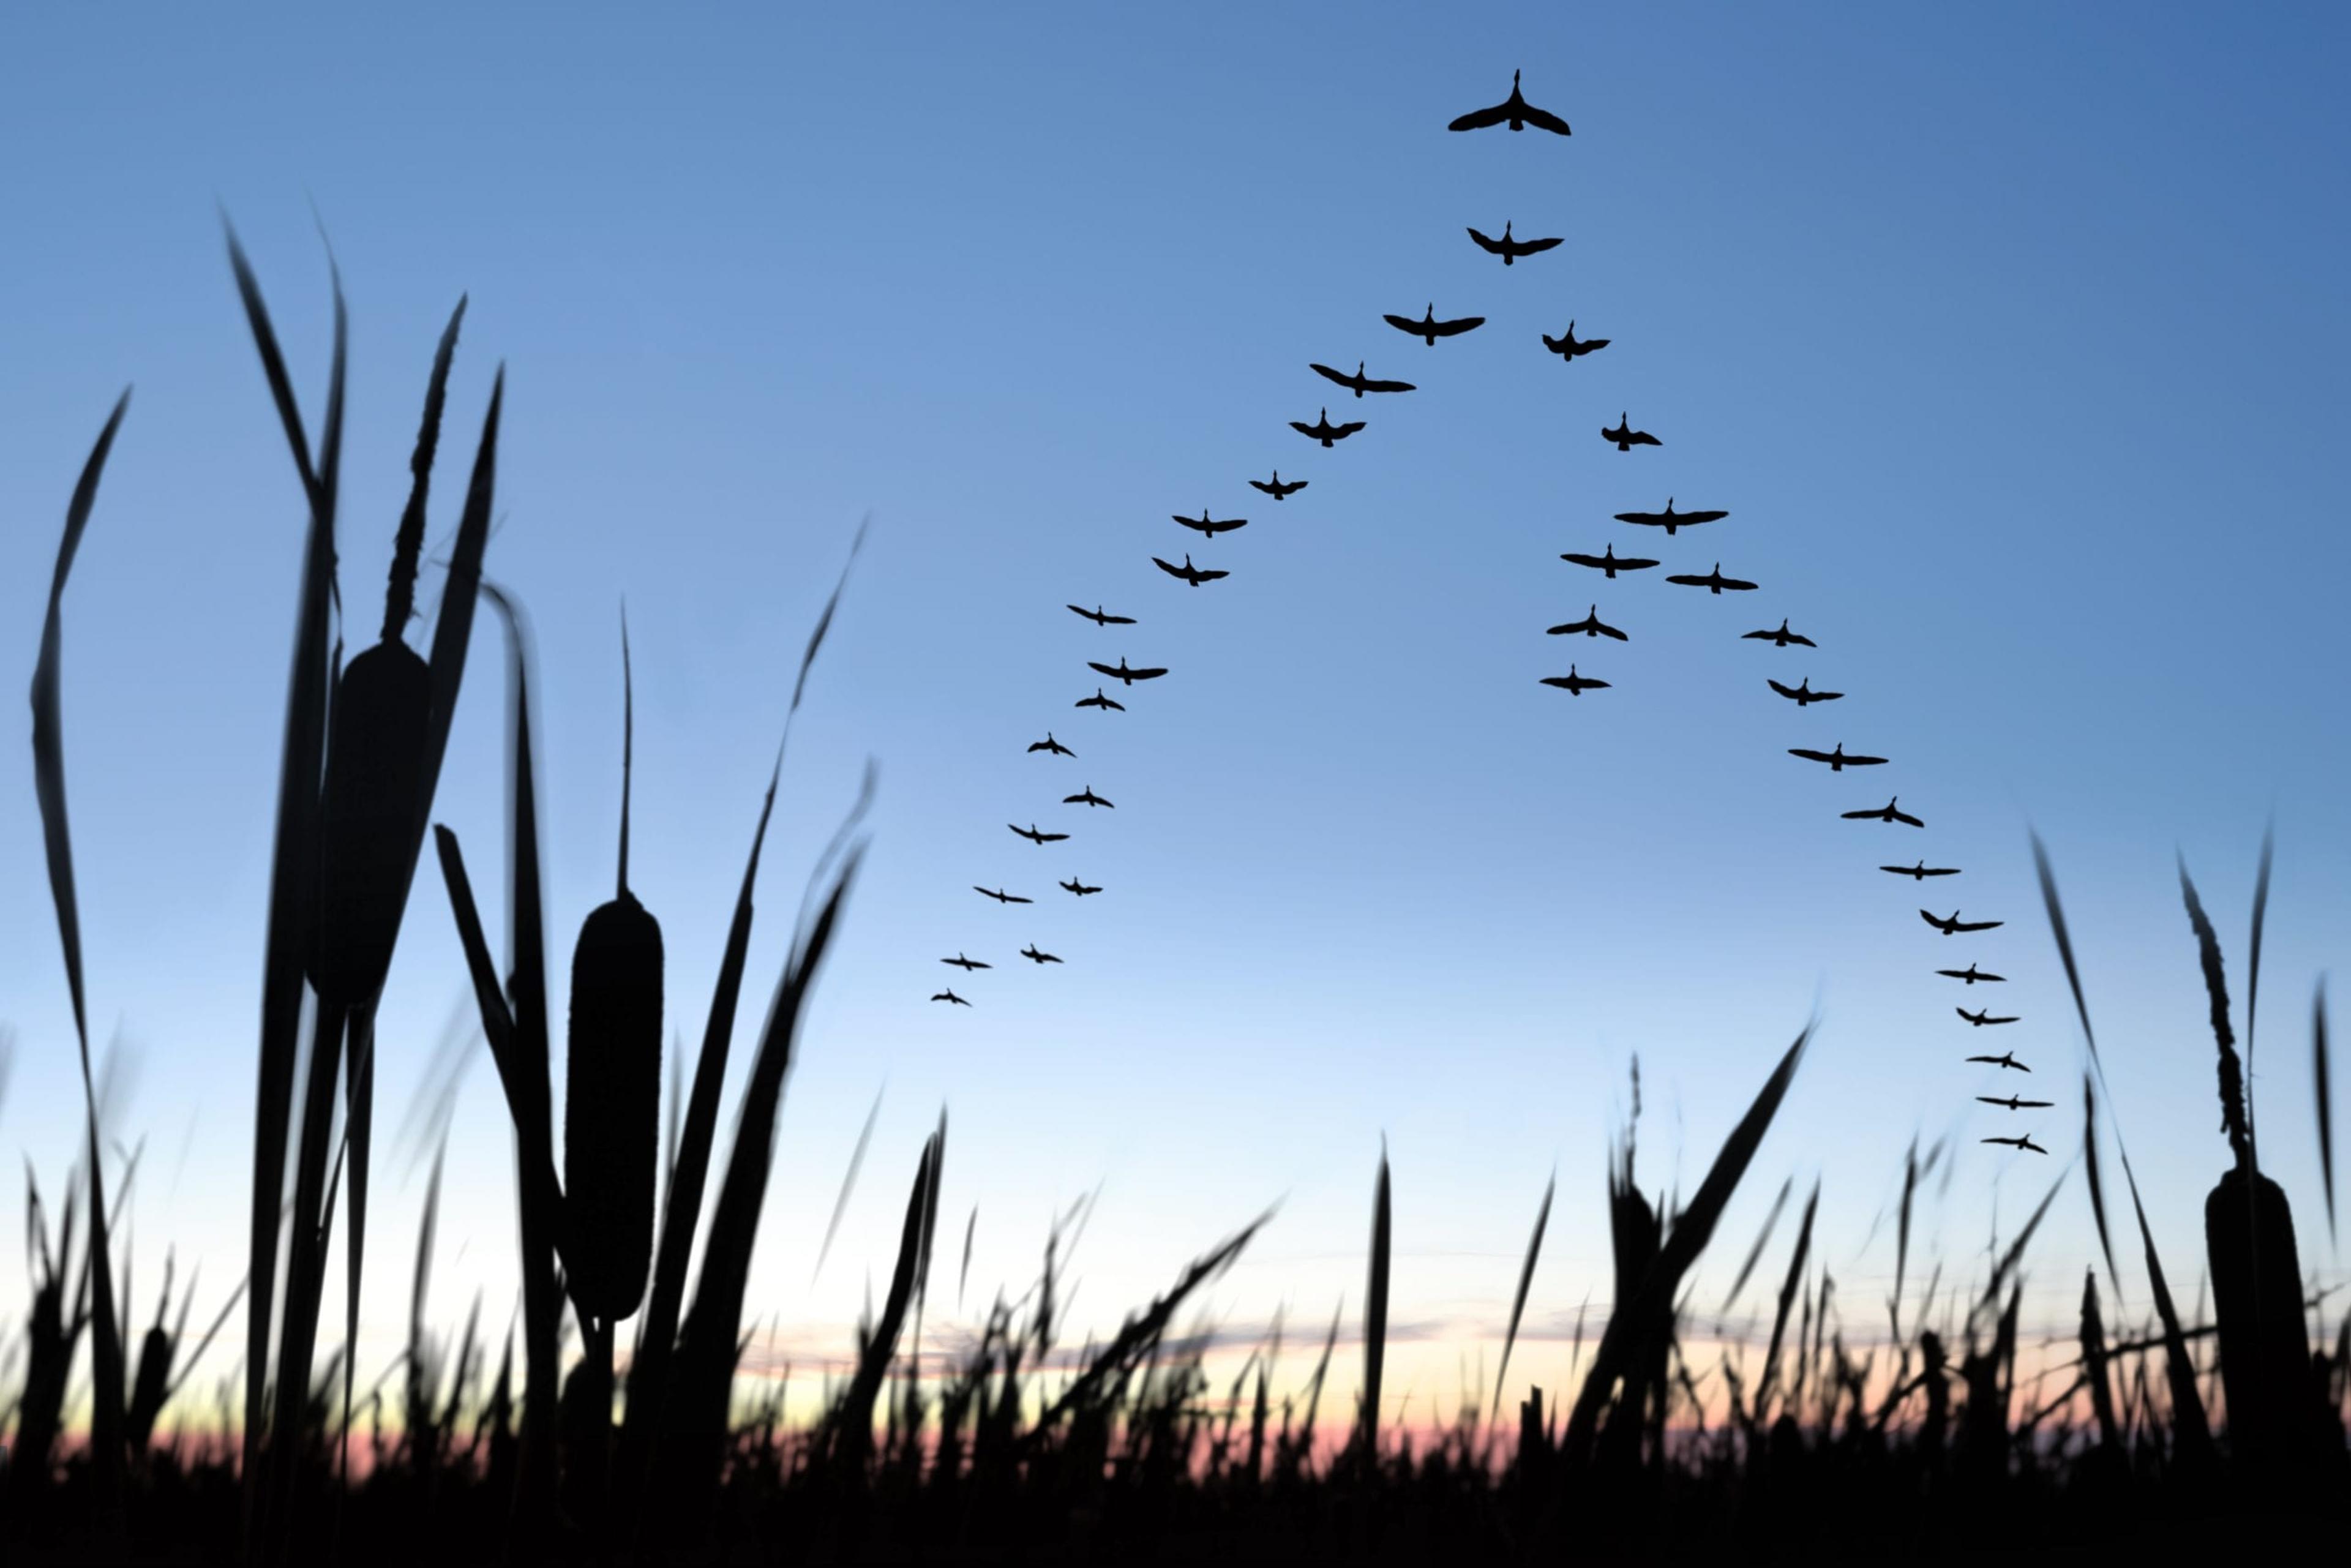 Canadian geese flying in formation against a northern Michigan sky.